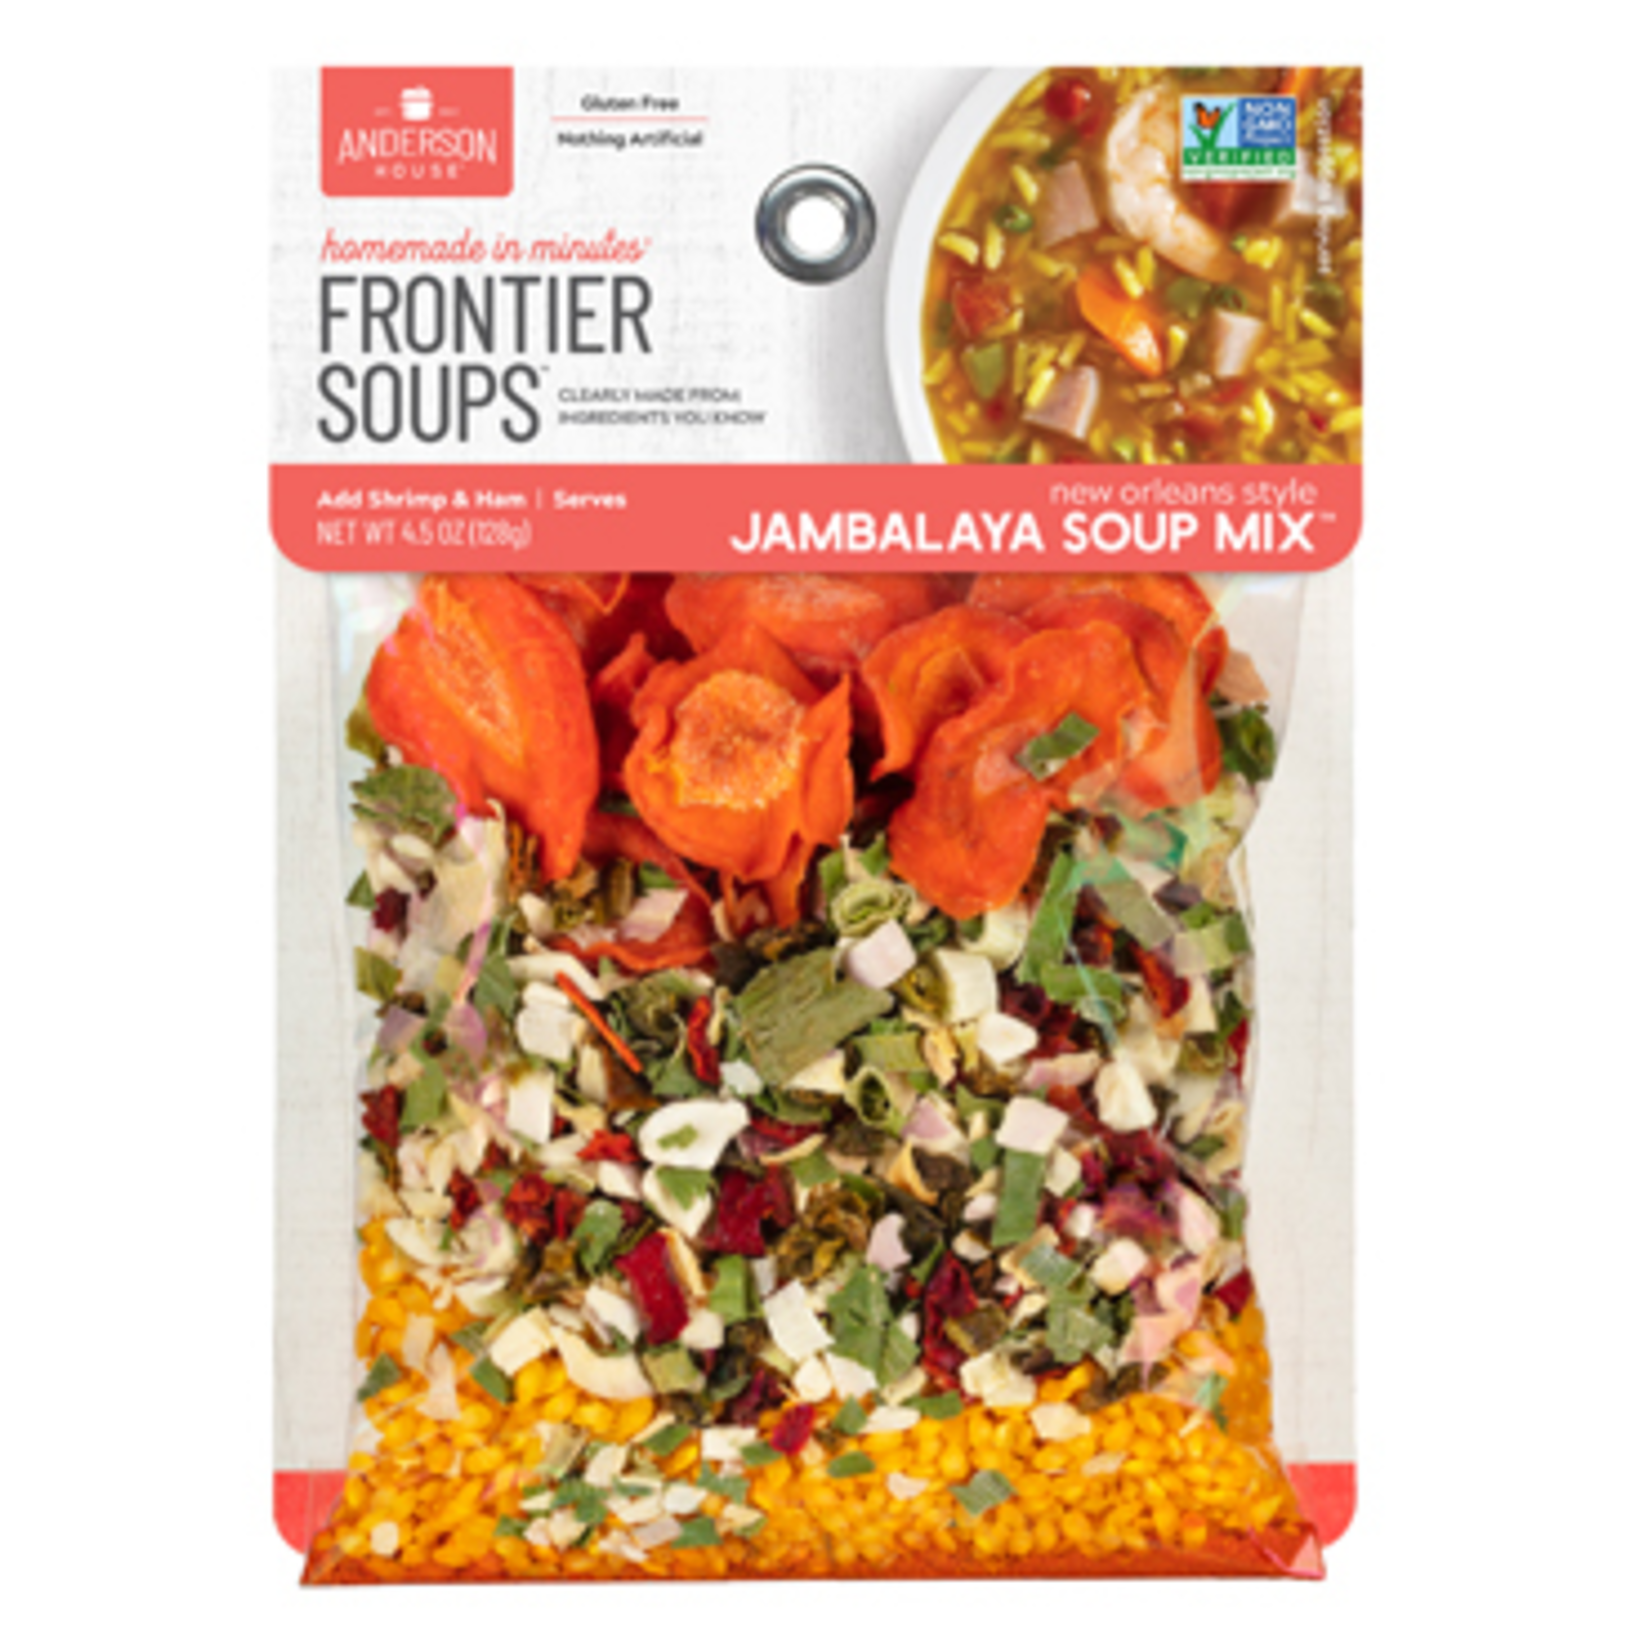 Frontier Soups New Orleans Creole Jambalaya Soup Mix